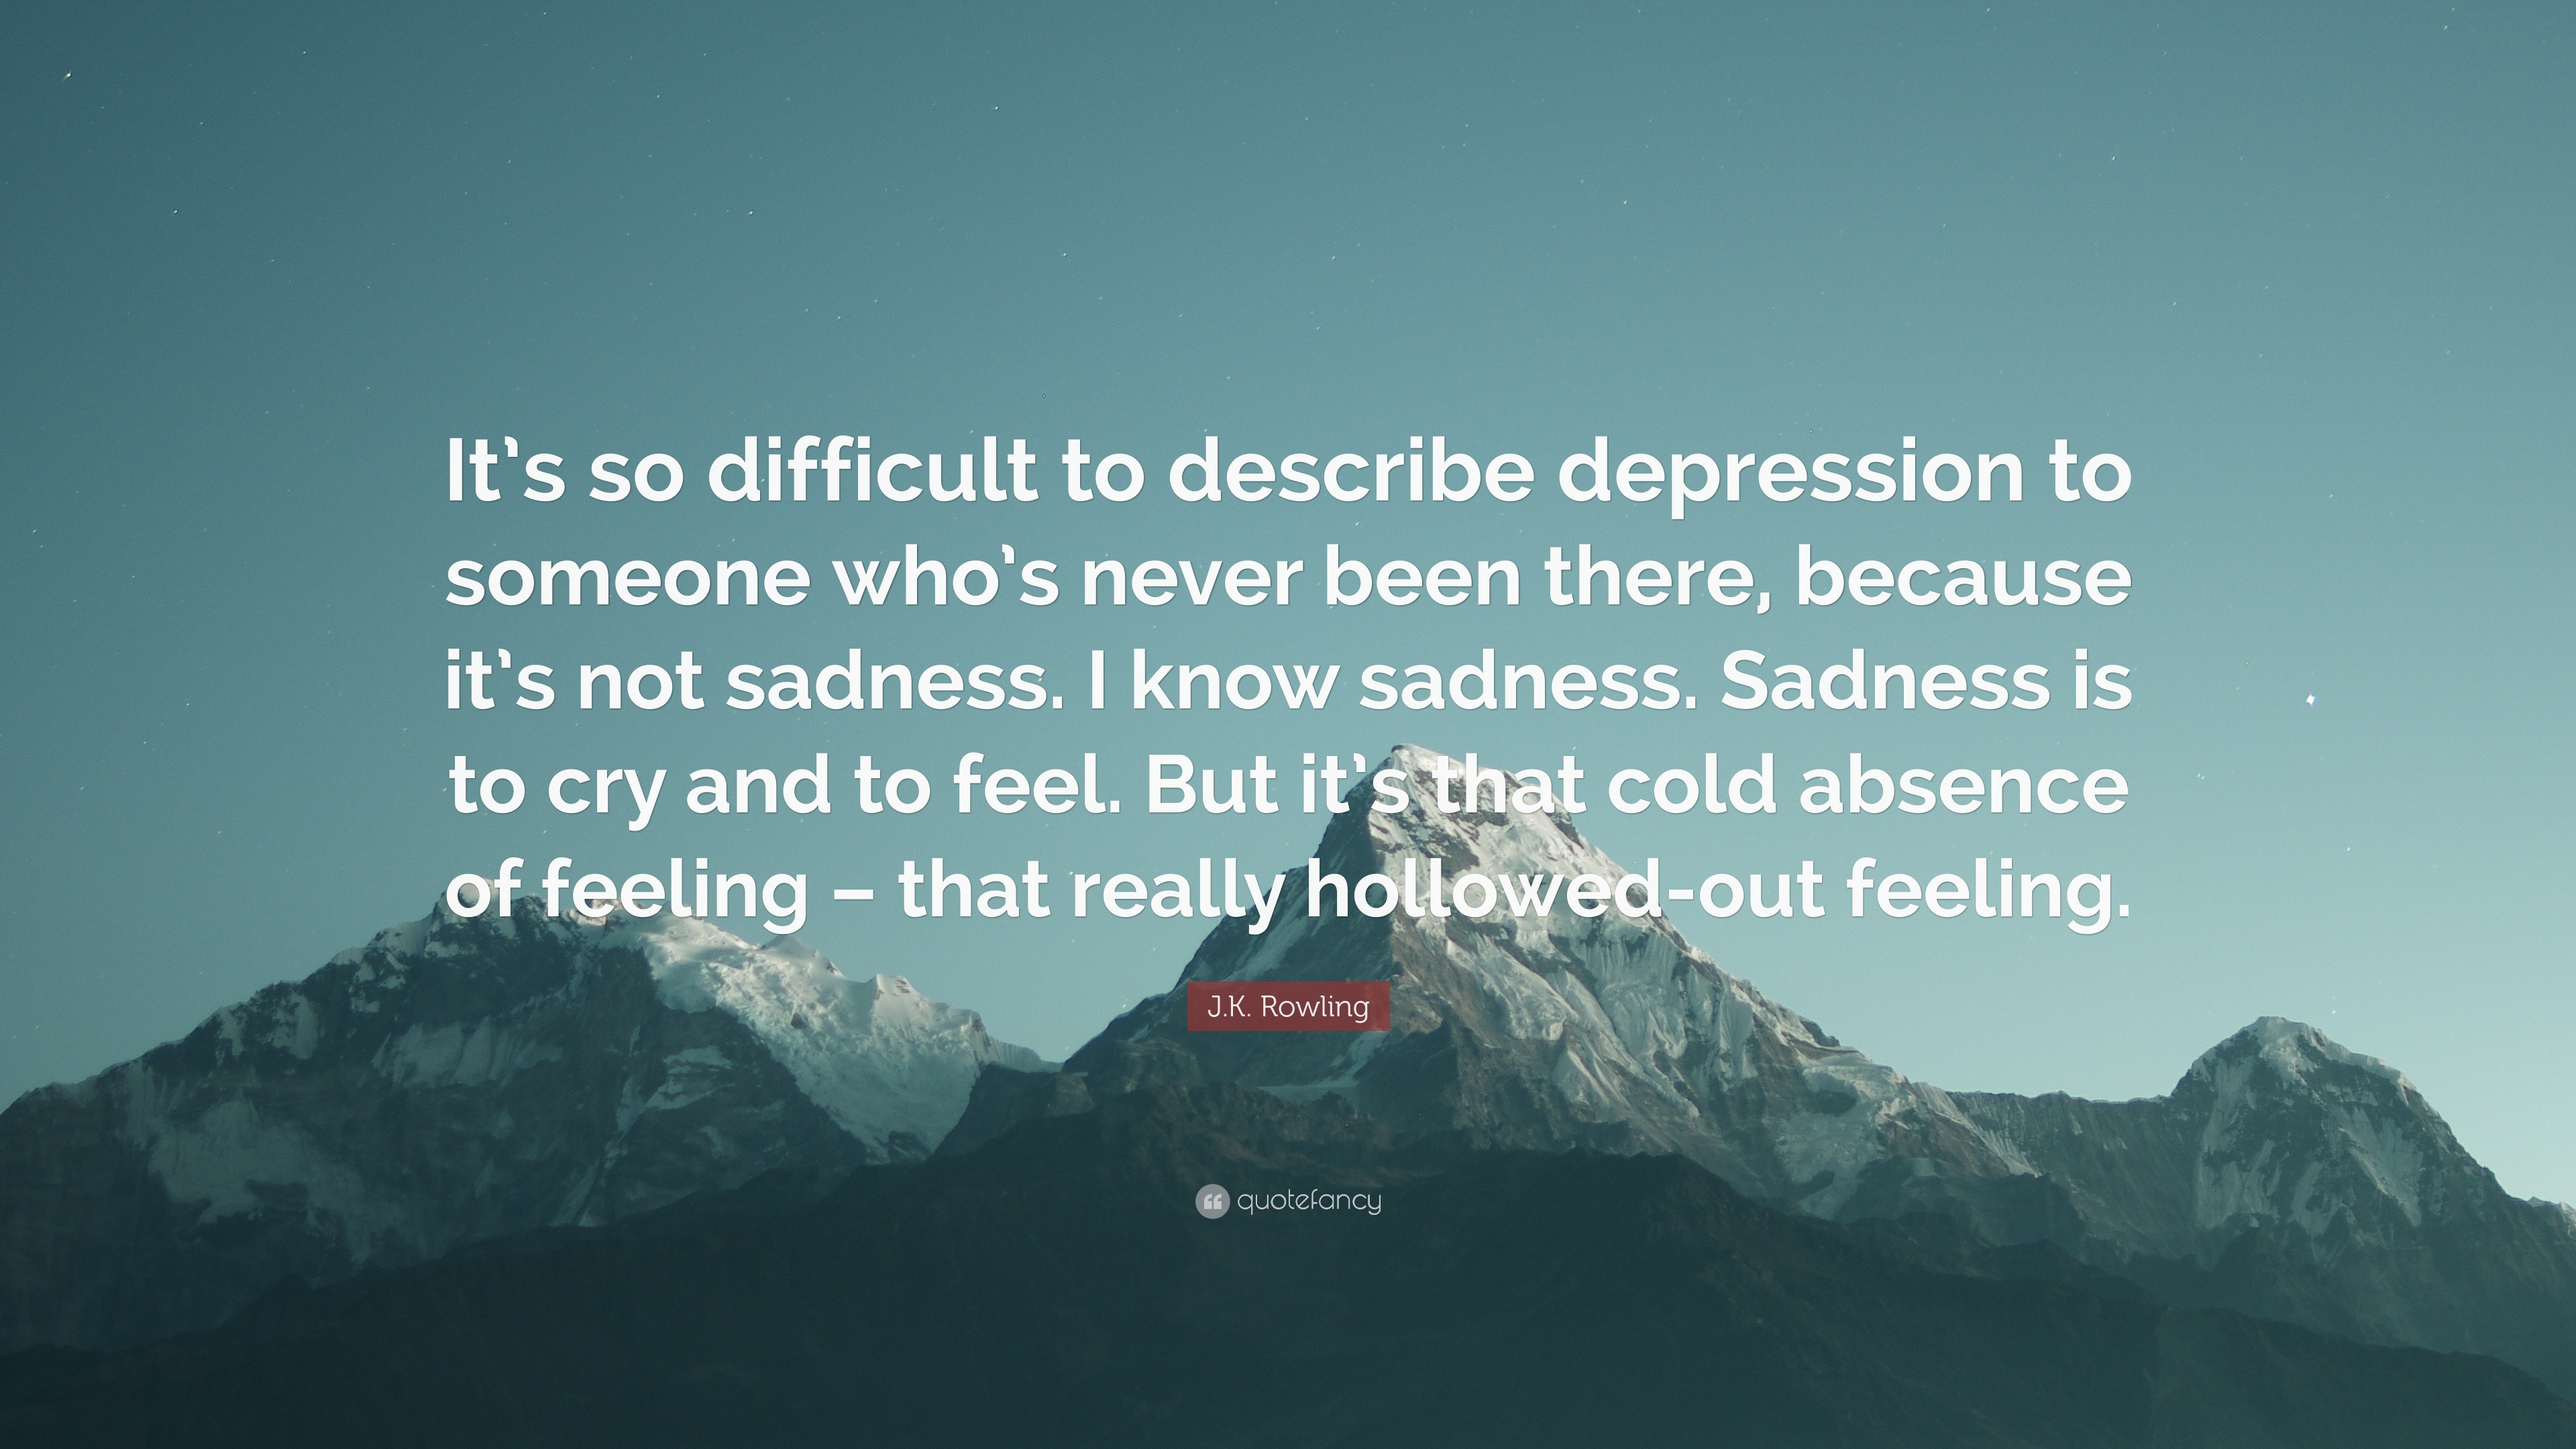 J.K. Rowling Quote: “It’s so difficult to describe depression to ...